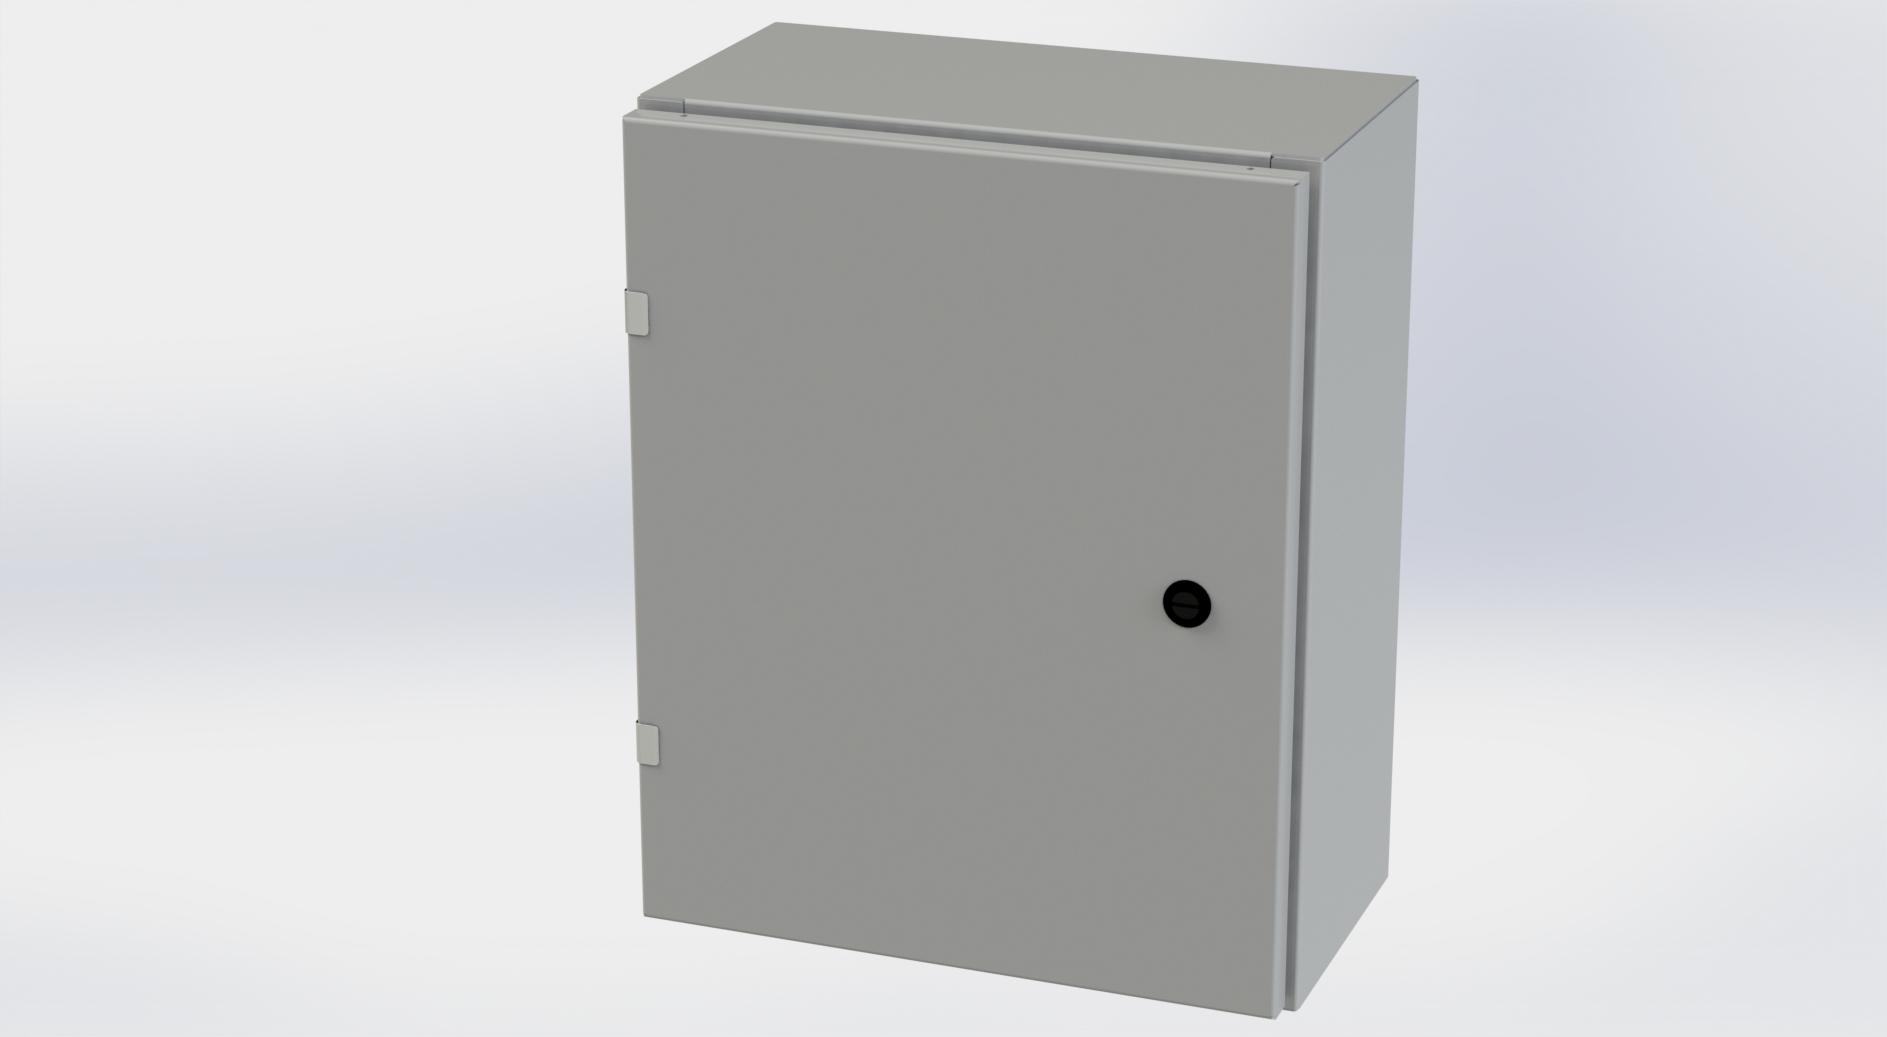 Saginaw Control SCE-20EL1608LP EL Enclosure, Height:20.00", Width:16.00", Depth:8.00", ANSI-61 gray powder coating inside and out. Optional sub-panels are powder coated white.